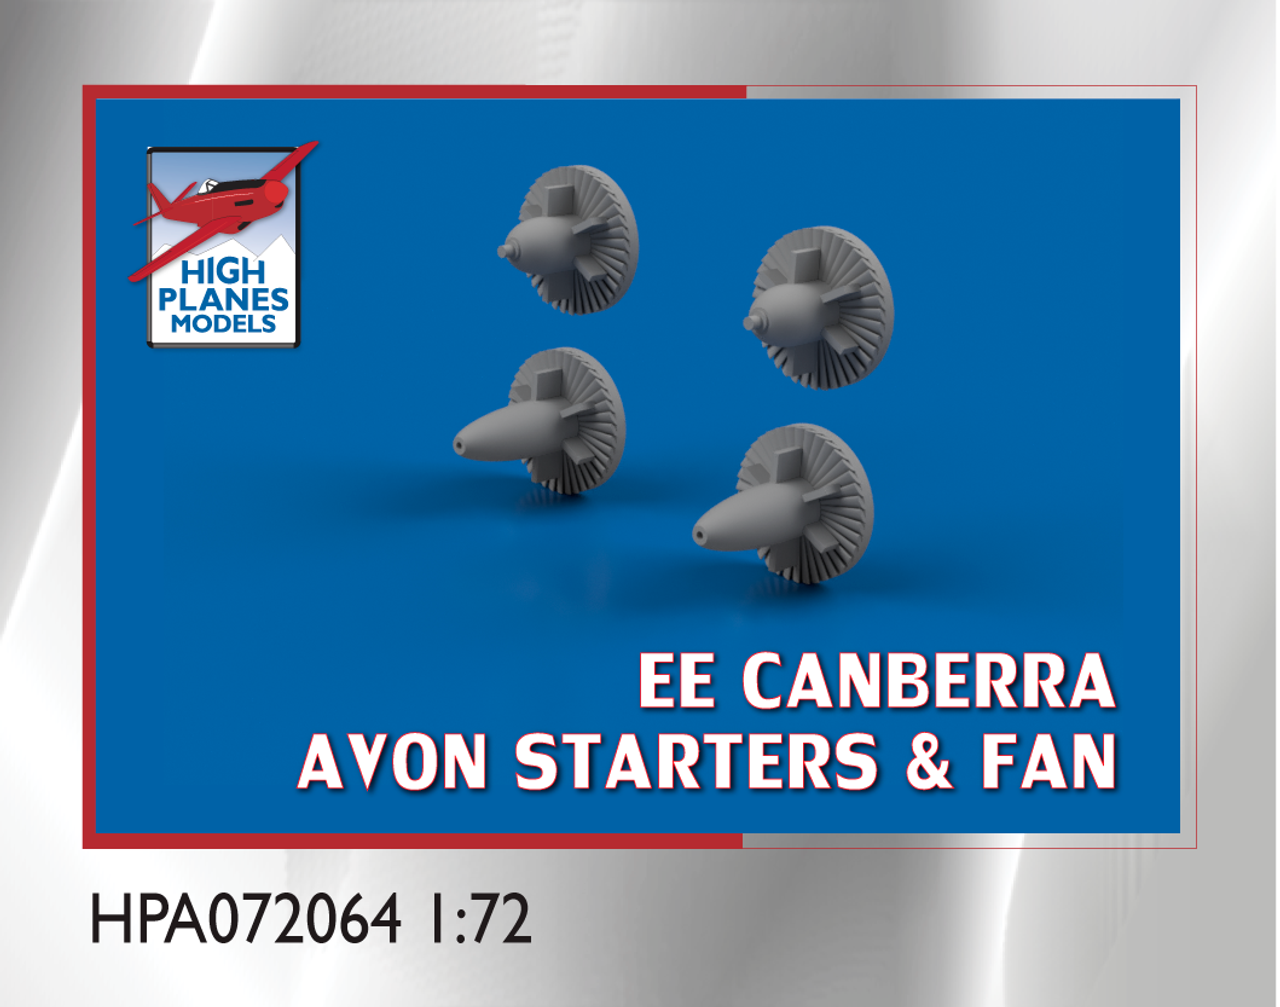 High Planes EE Canberra Avon Starters and Fan Accessories 1:72 (HPA072064)